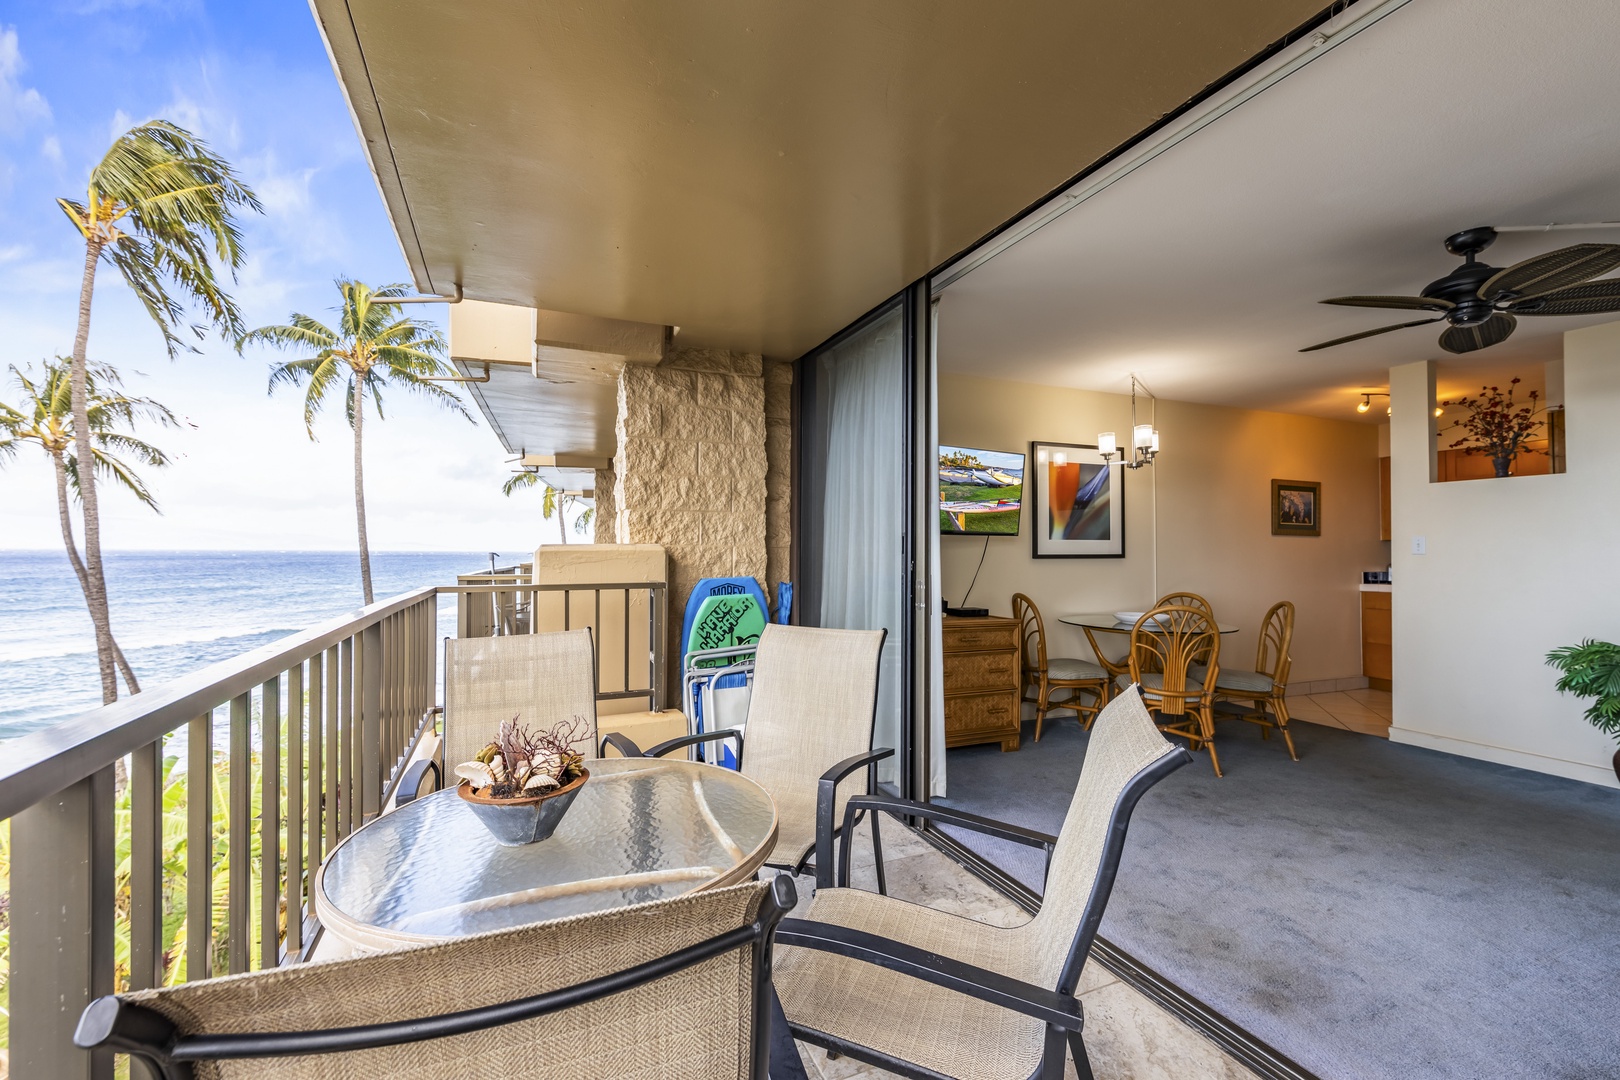 Lanai with outdoor seating, and ocean view